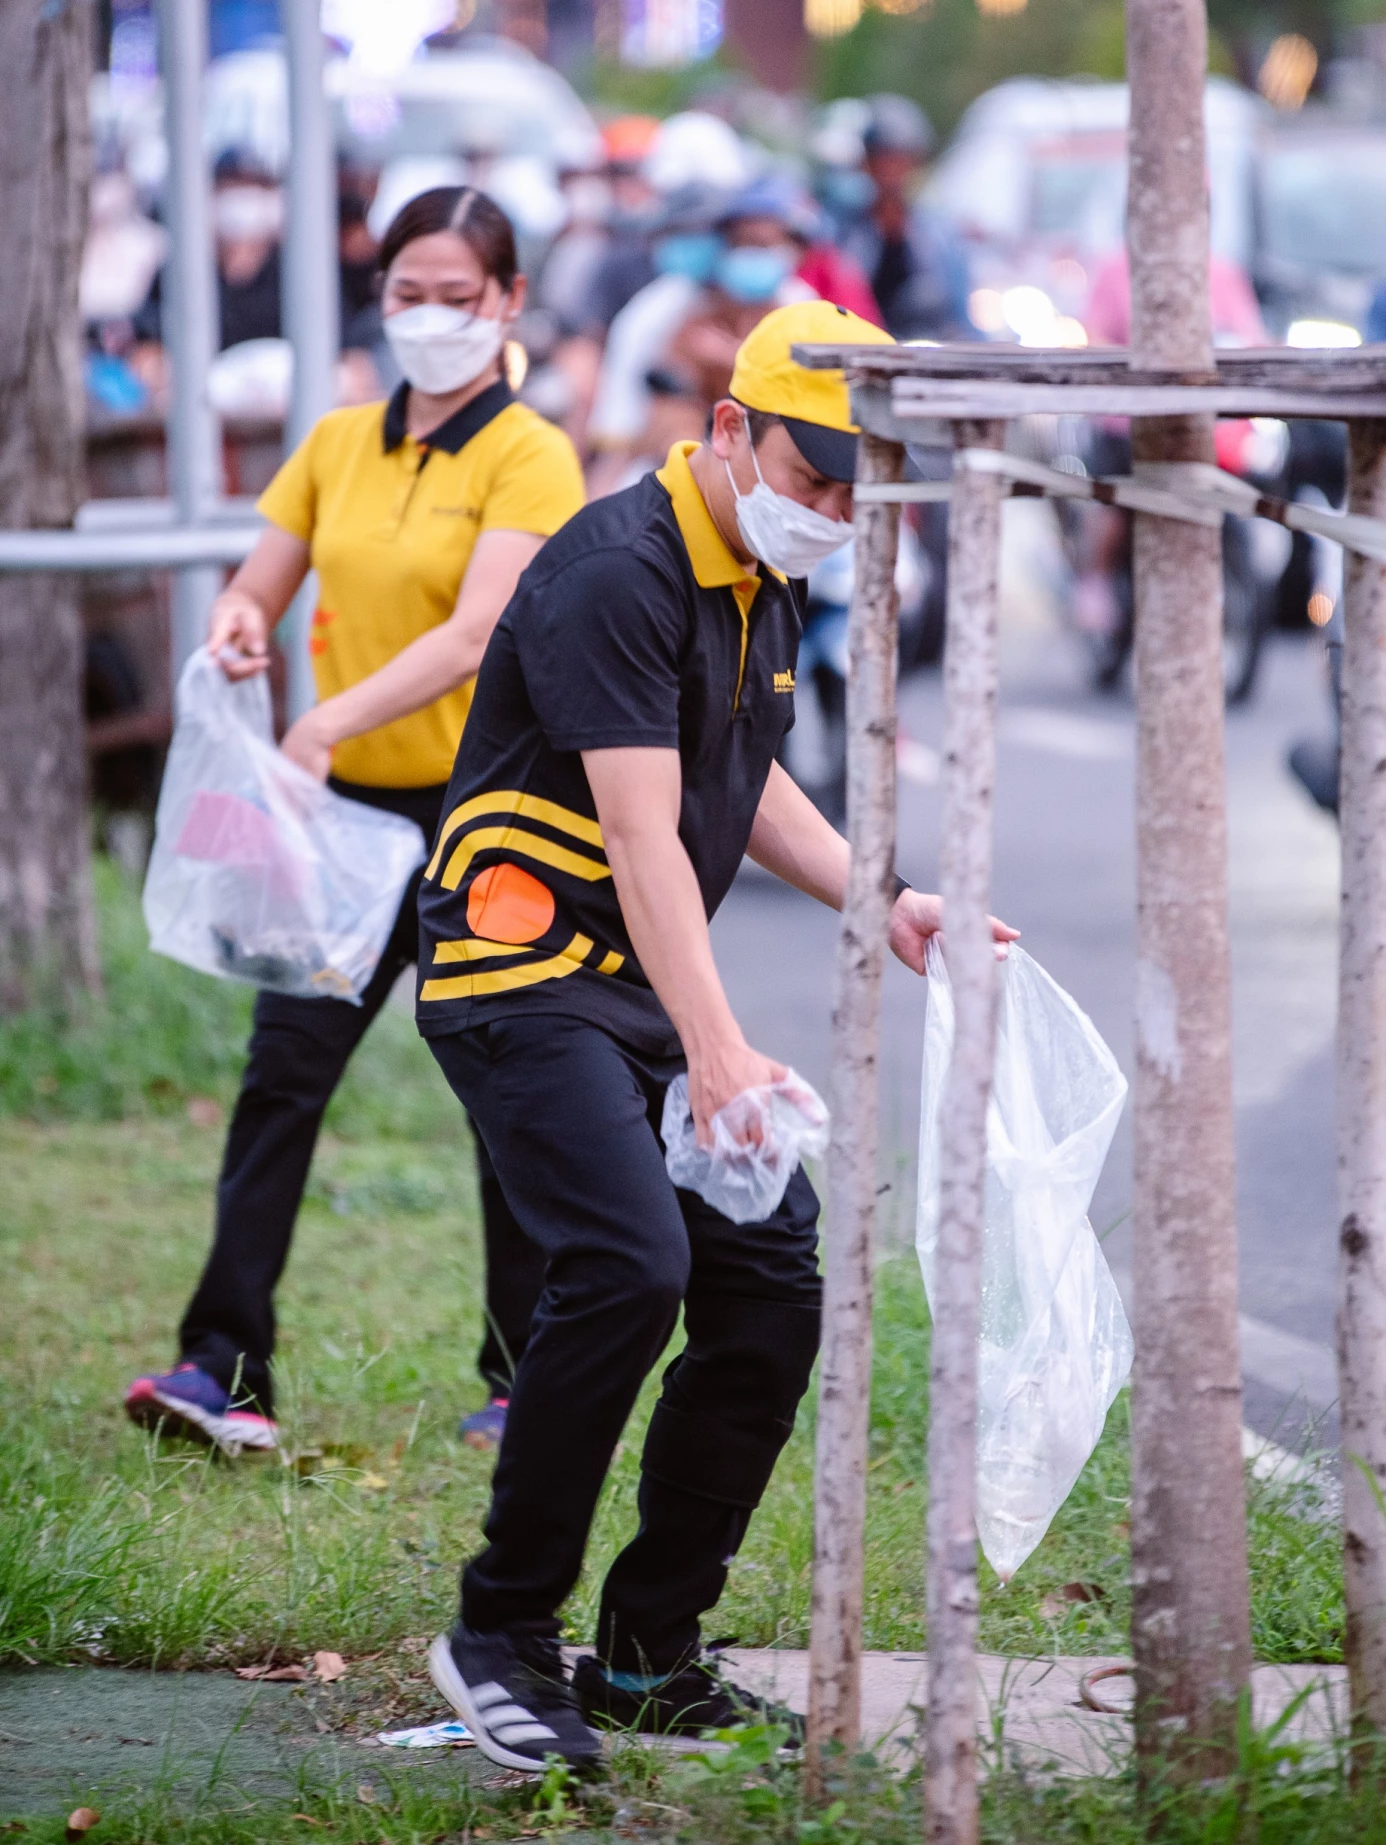 InterLOG members combine running with roadside trash collection